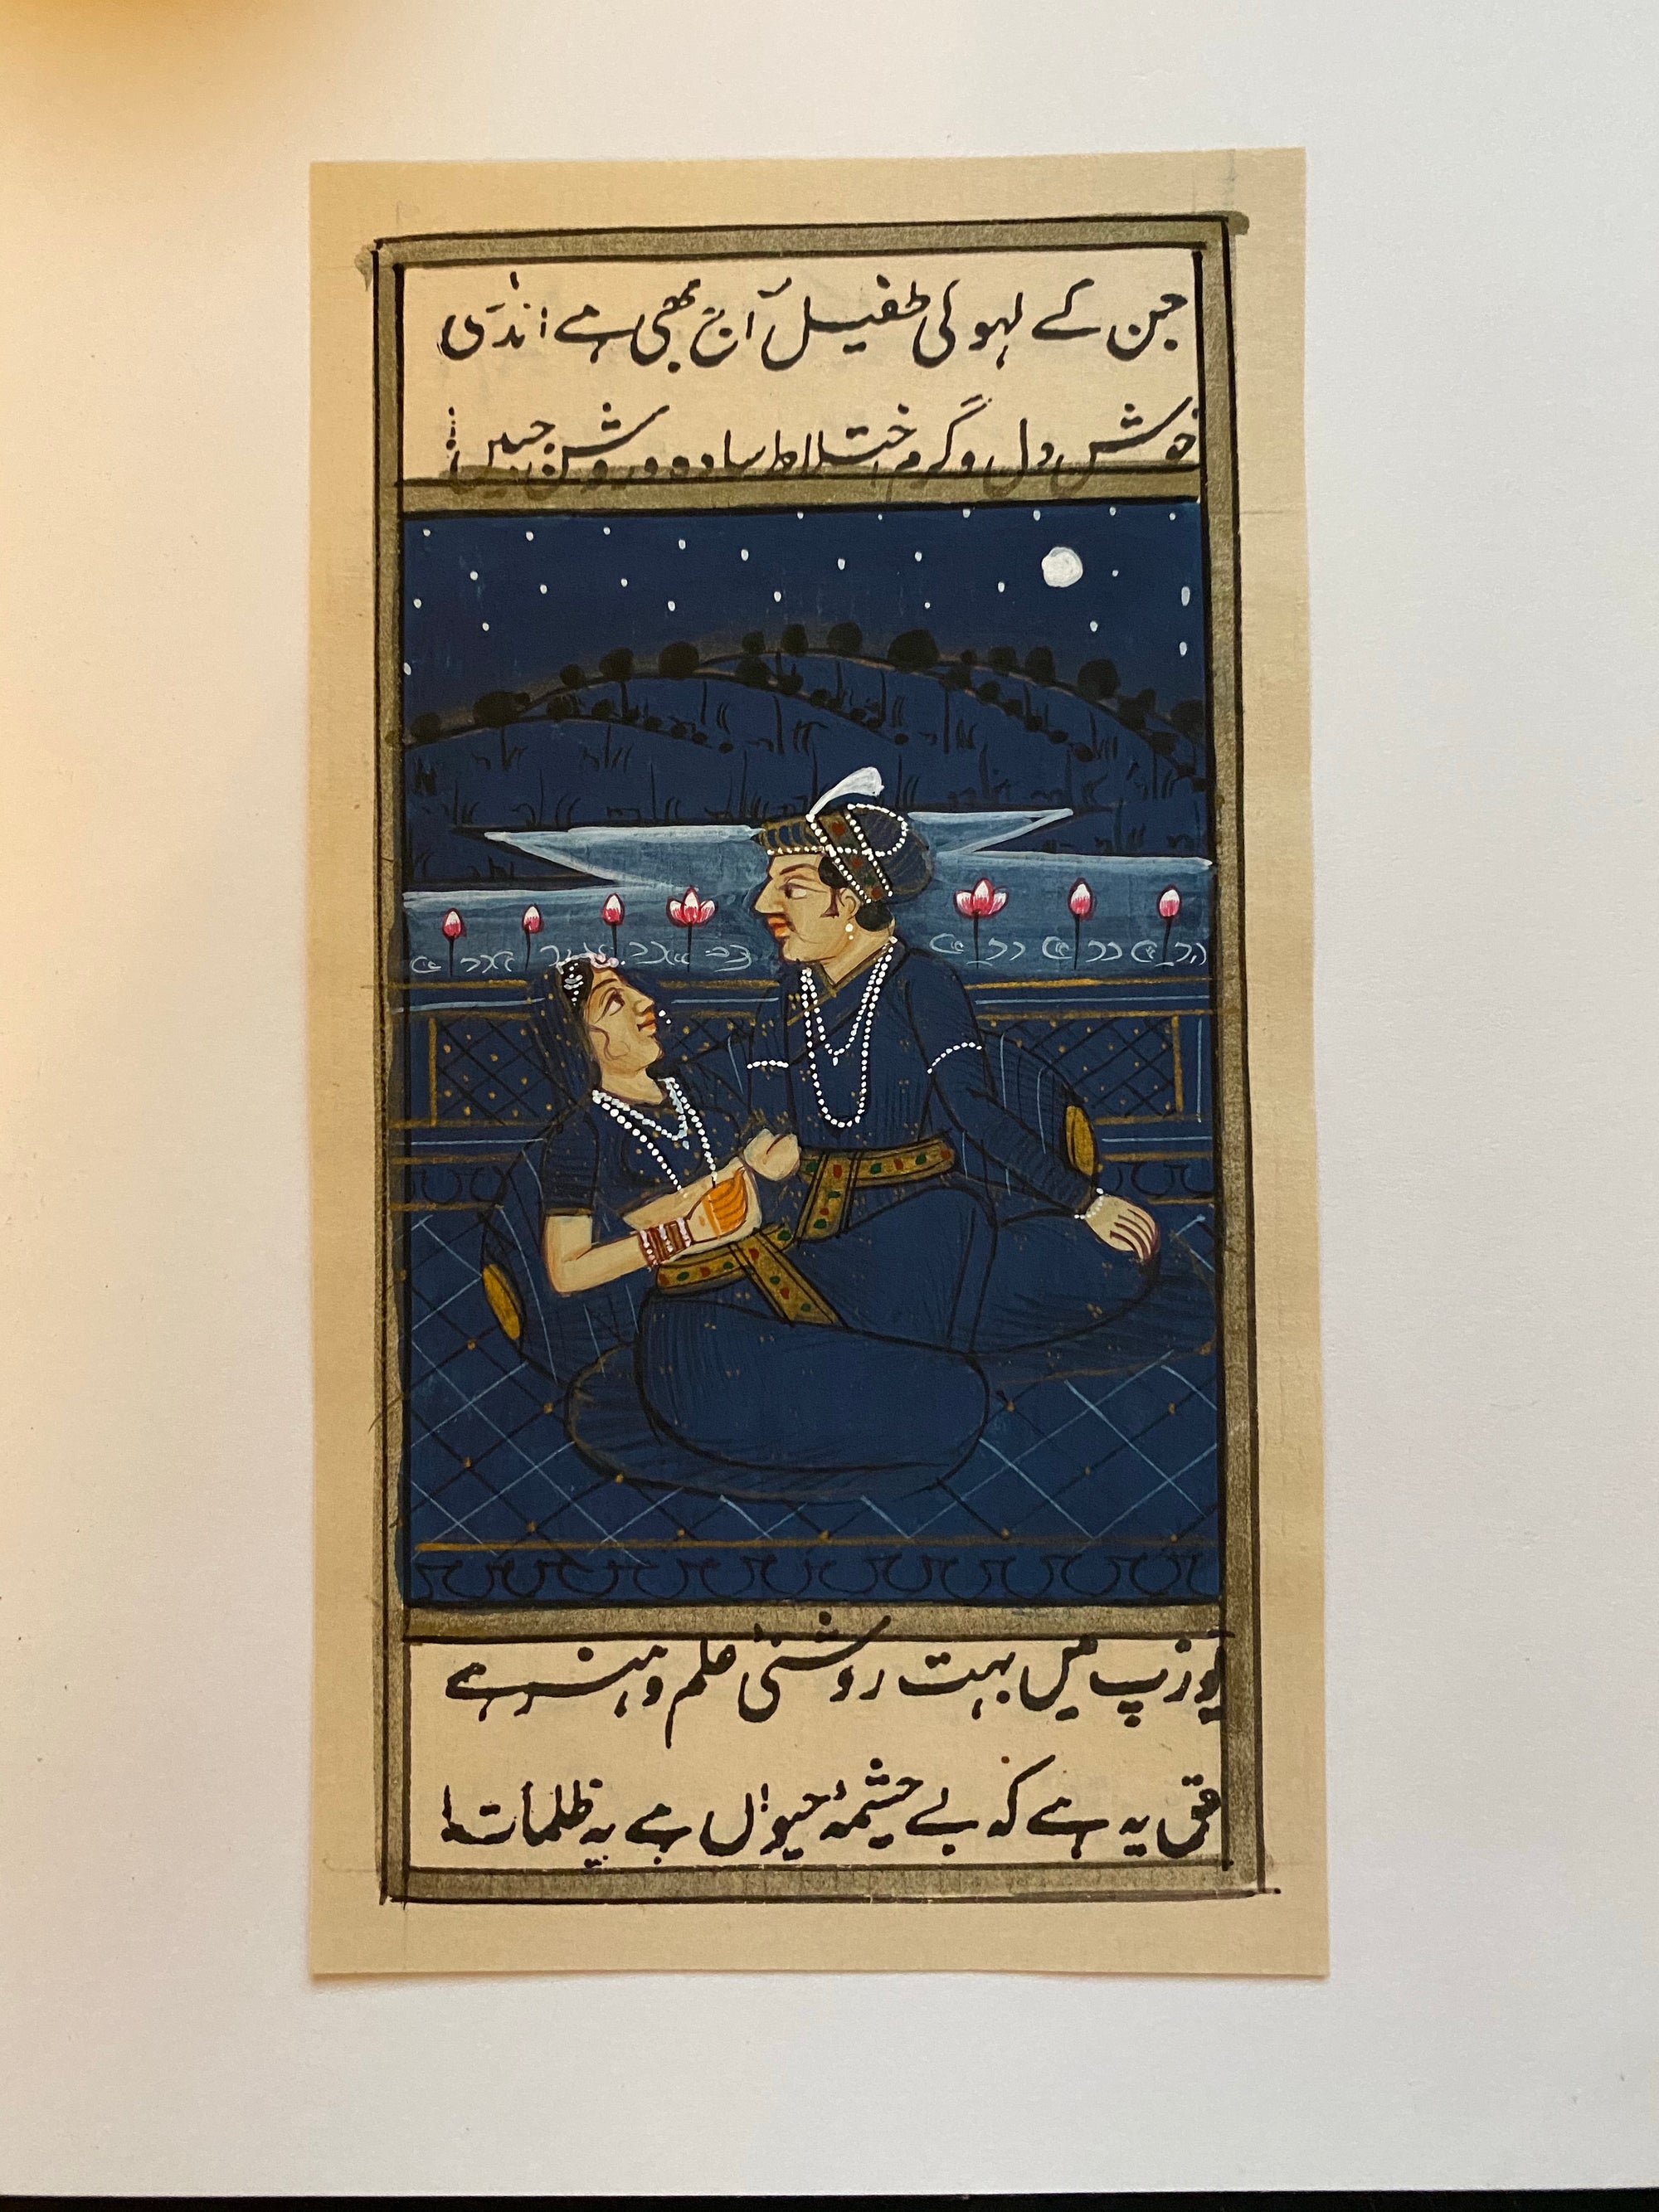 original painting in the Mogul style, depicting a classic love scene between a Maharaja and his Maharani